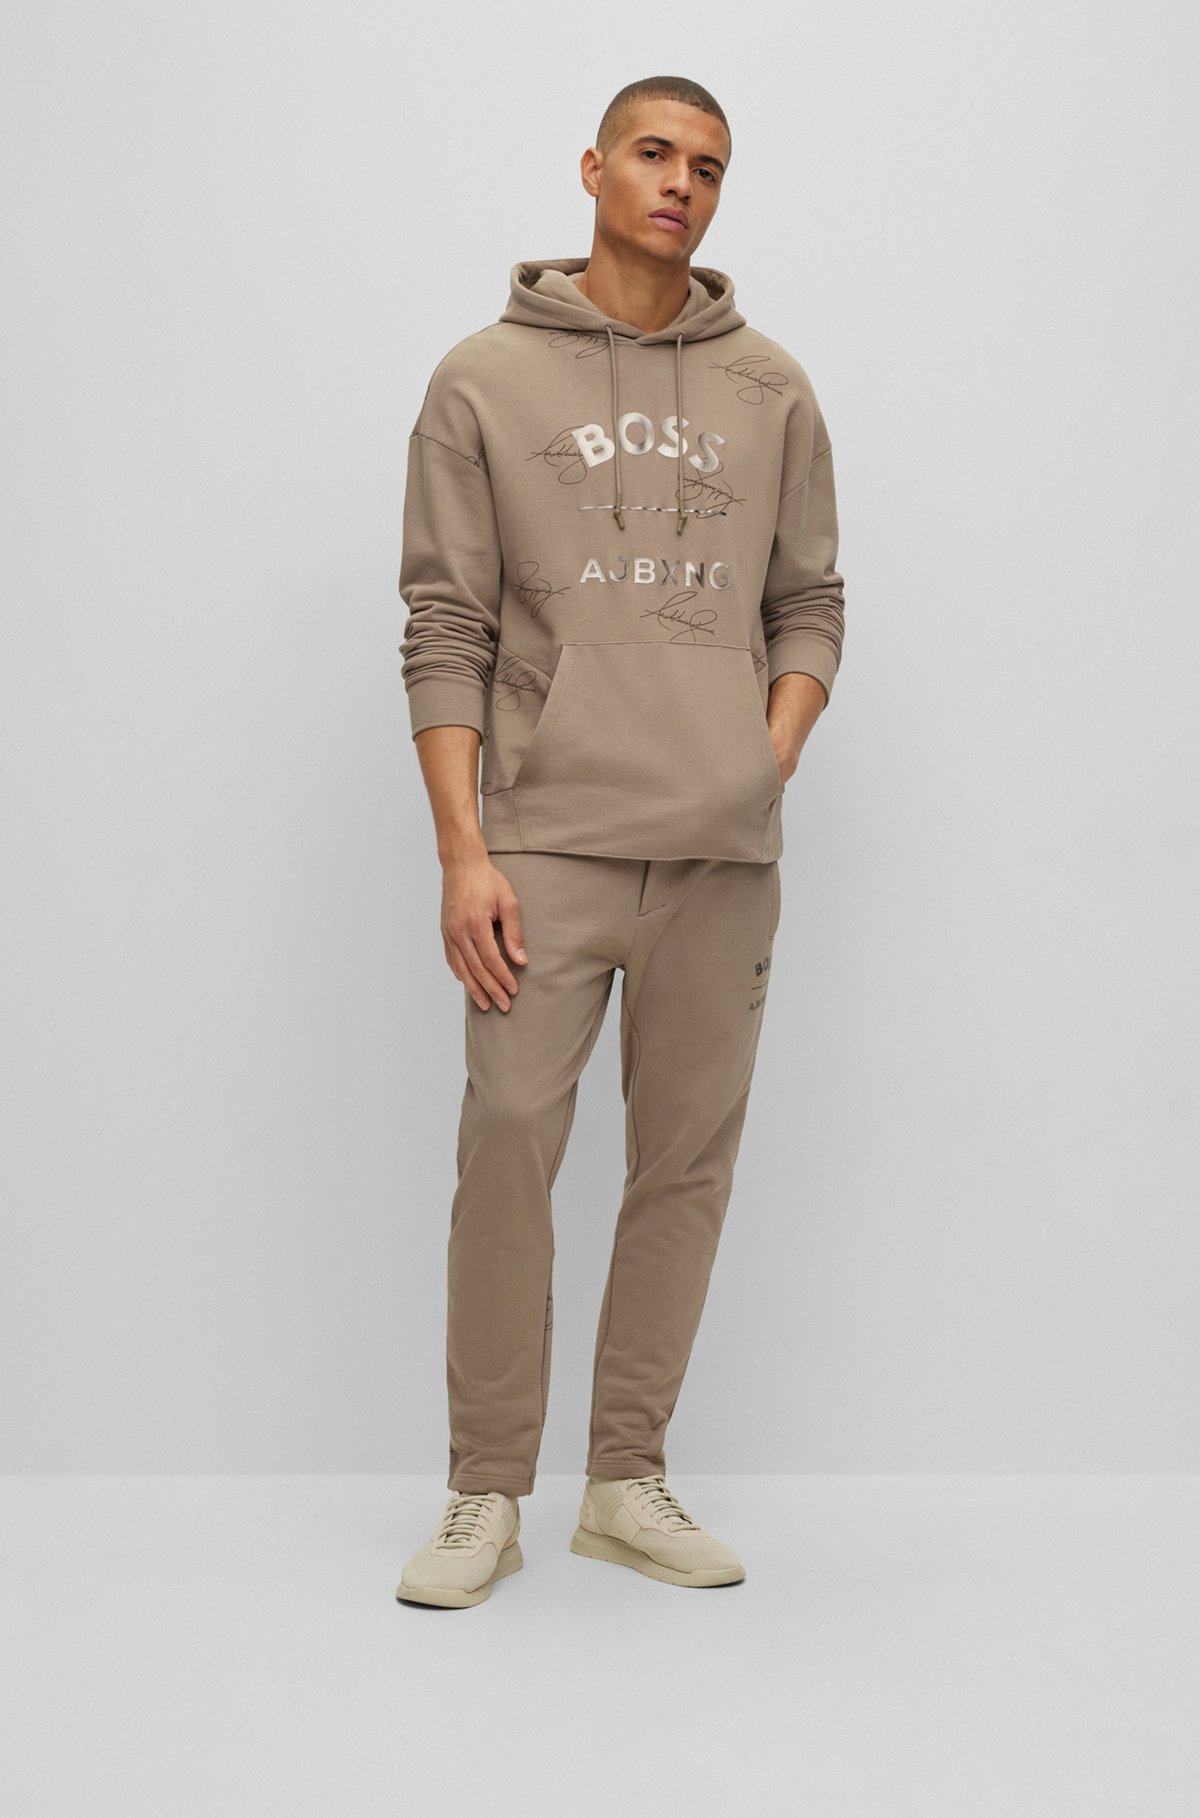 BOSS - BOSS x AJBXNG cotton relaxed-fit hoodie with collaborative branding